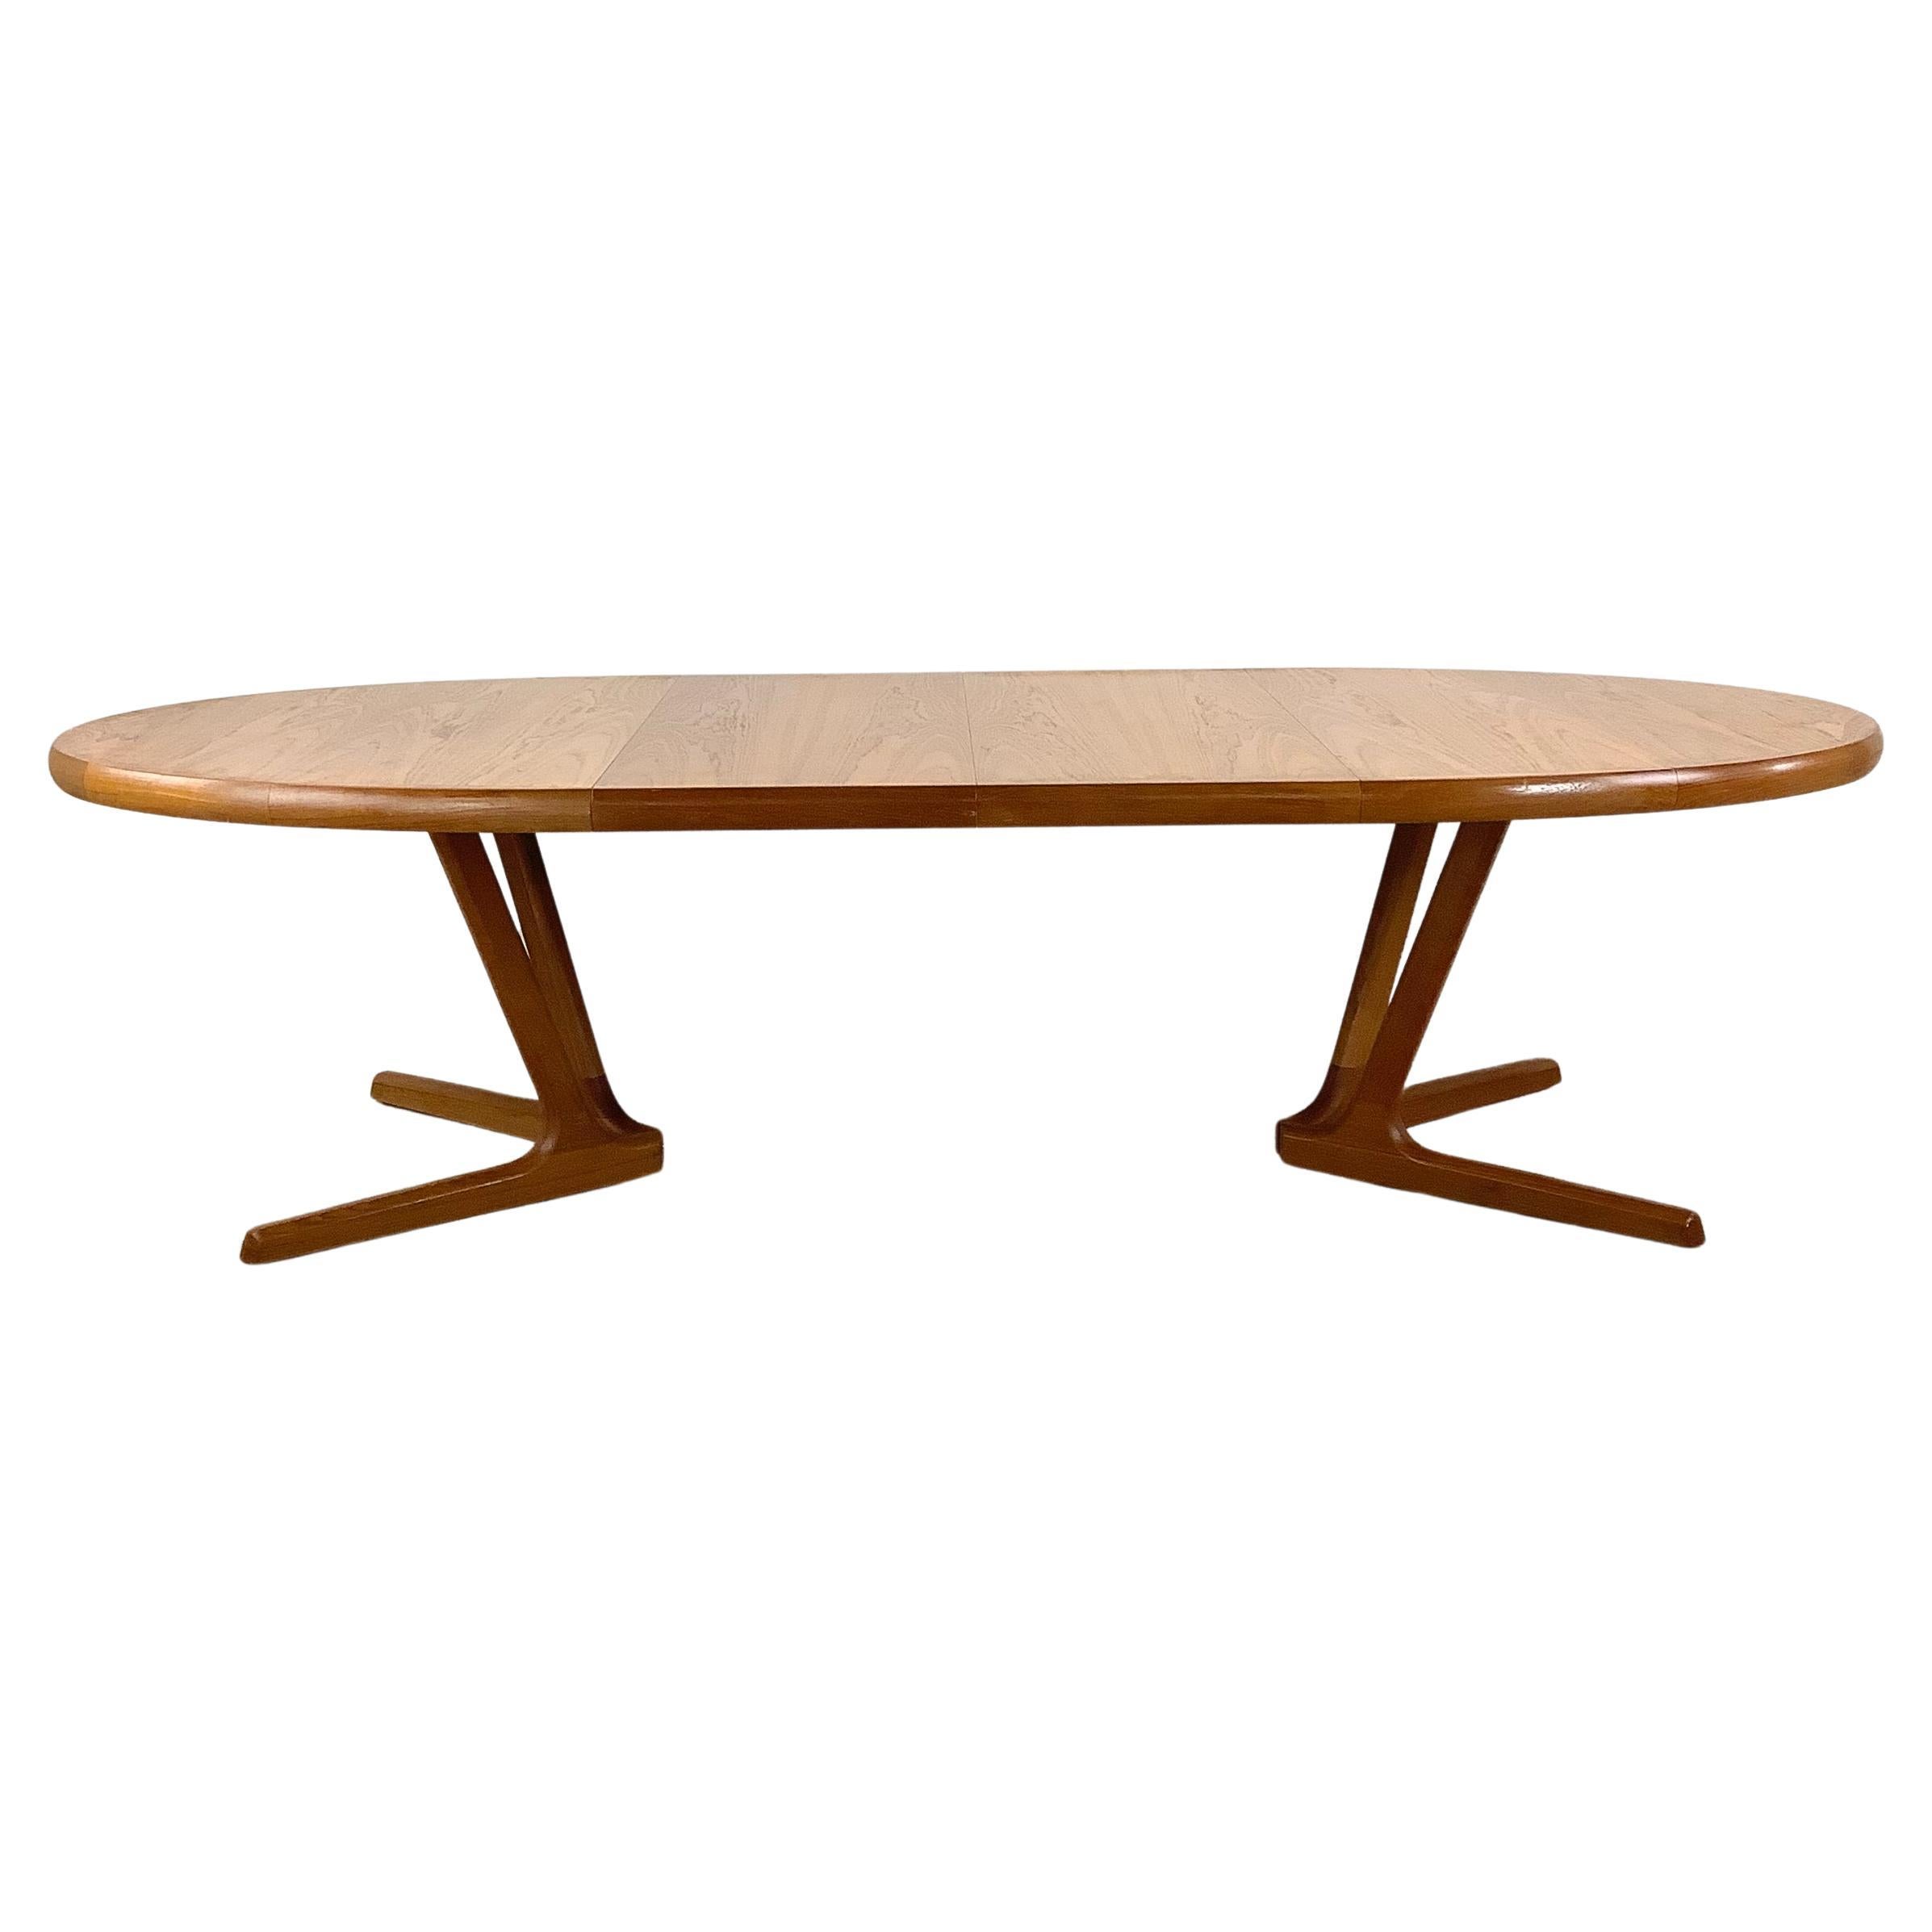 Scandinavian Modern Teak Oval Dining Table With Leaves For Sale